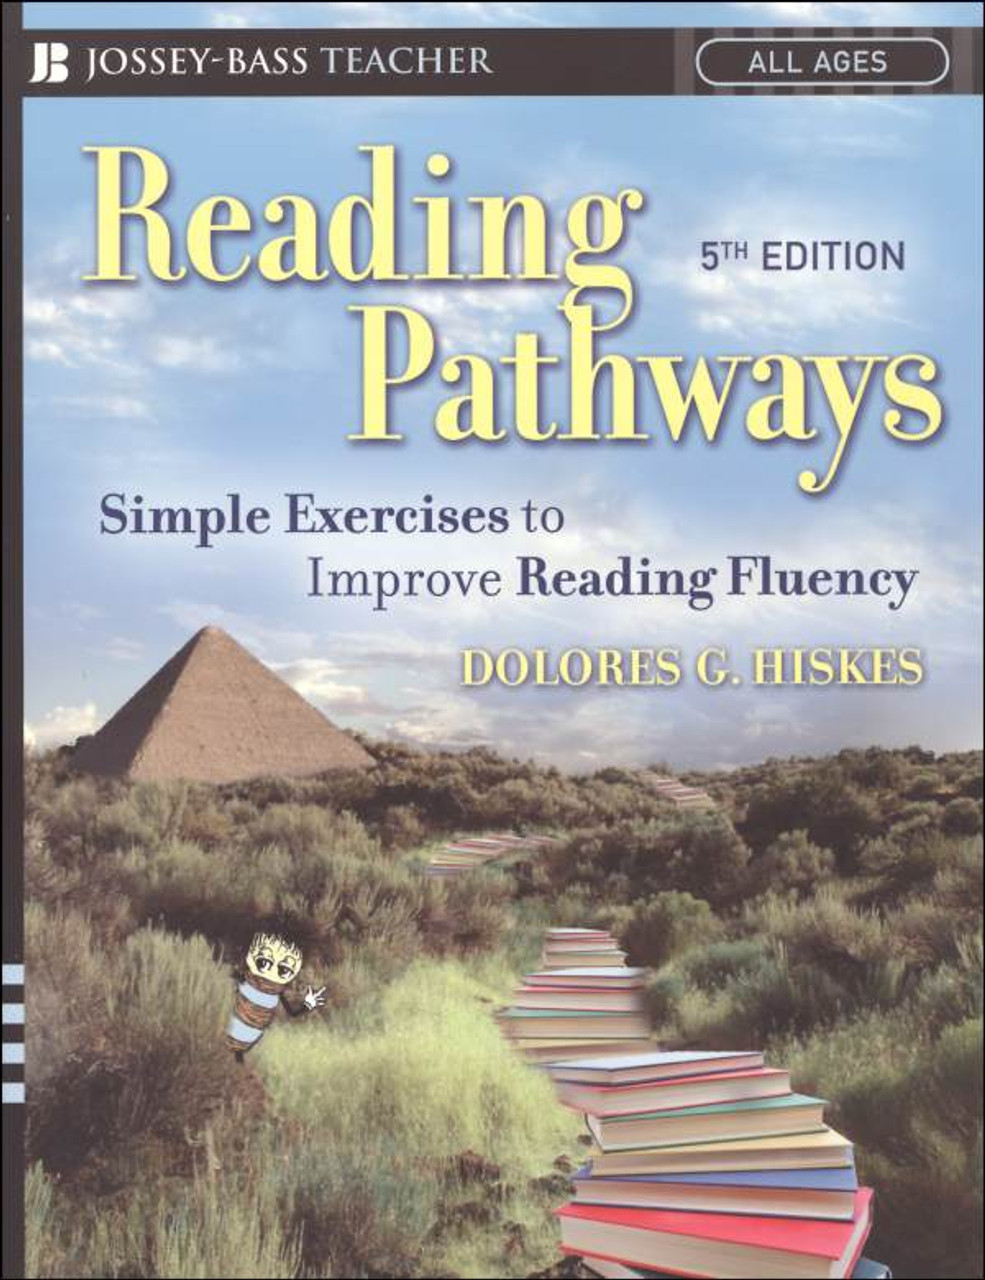 Reading　Fluency　Exercises　Simple　Center　Reading　to　Classroom　Pathways:　Improve　Resource